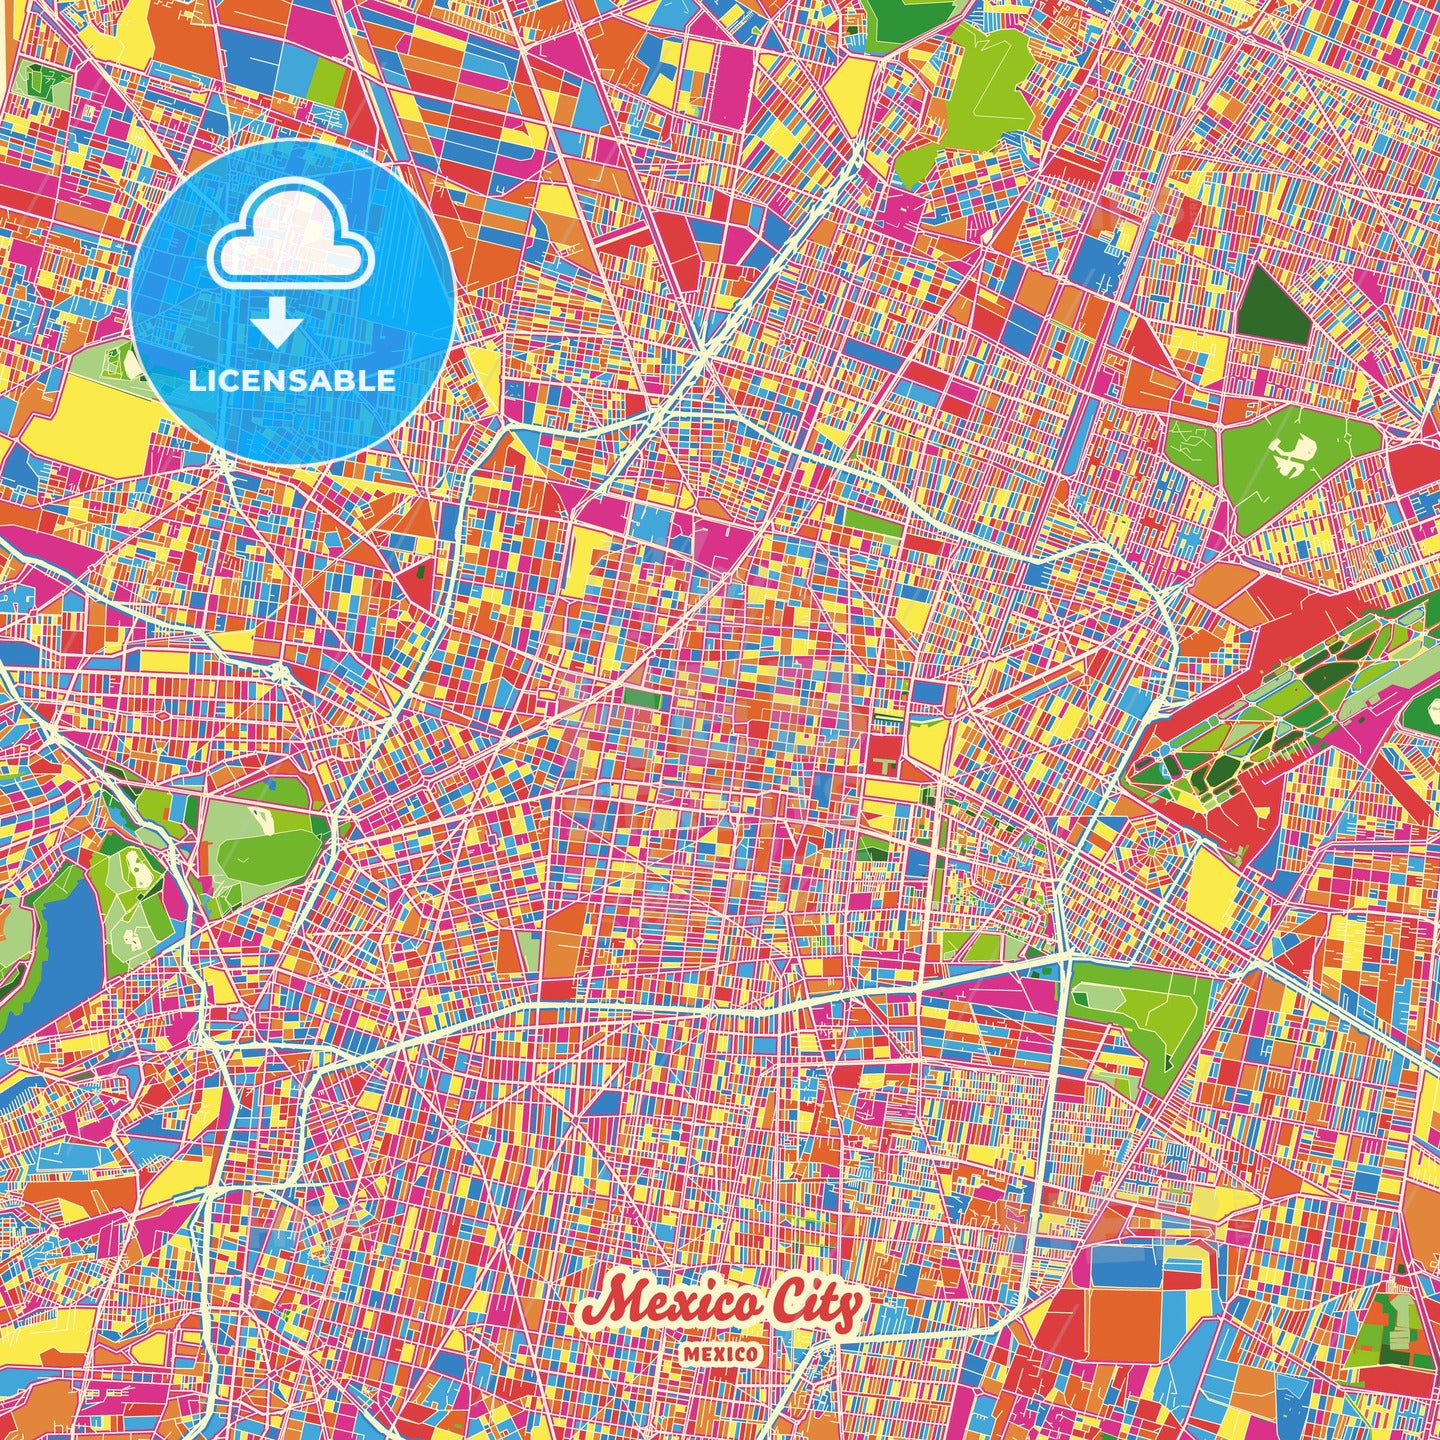 Mexico City, Mexico Crazy Colorful Street Map Poster Template - HEBSTREITS Sketches